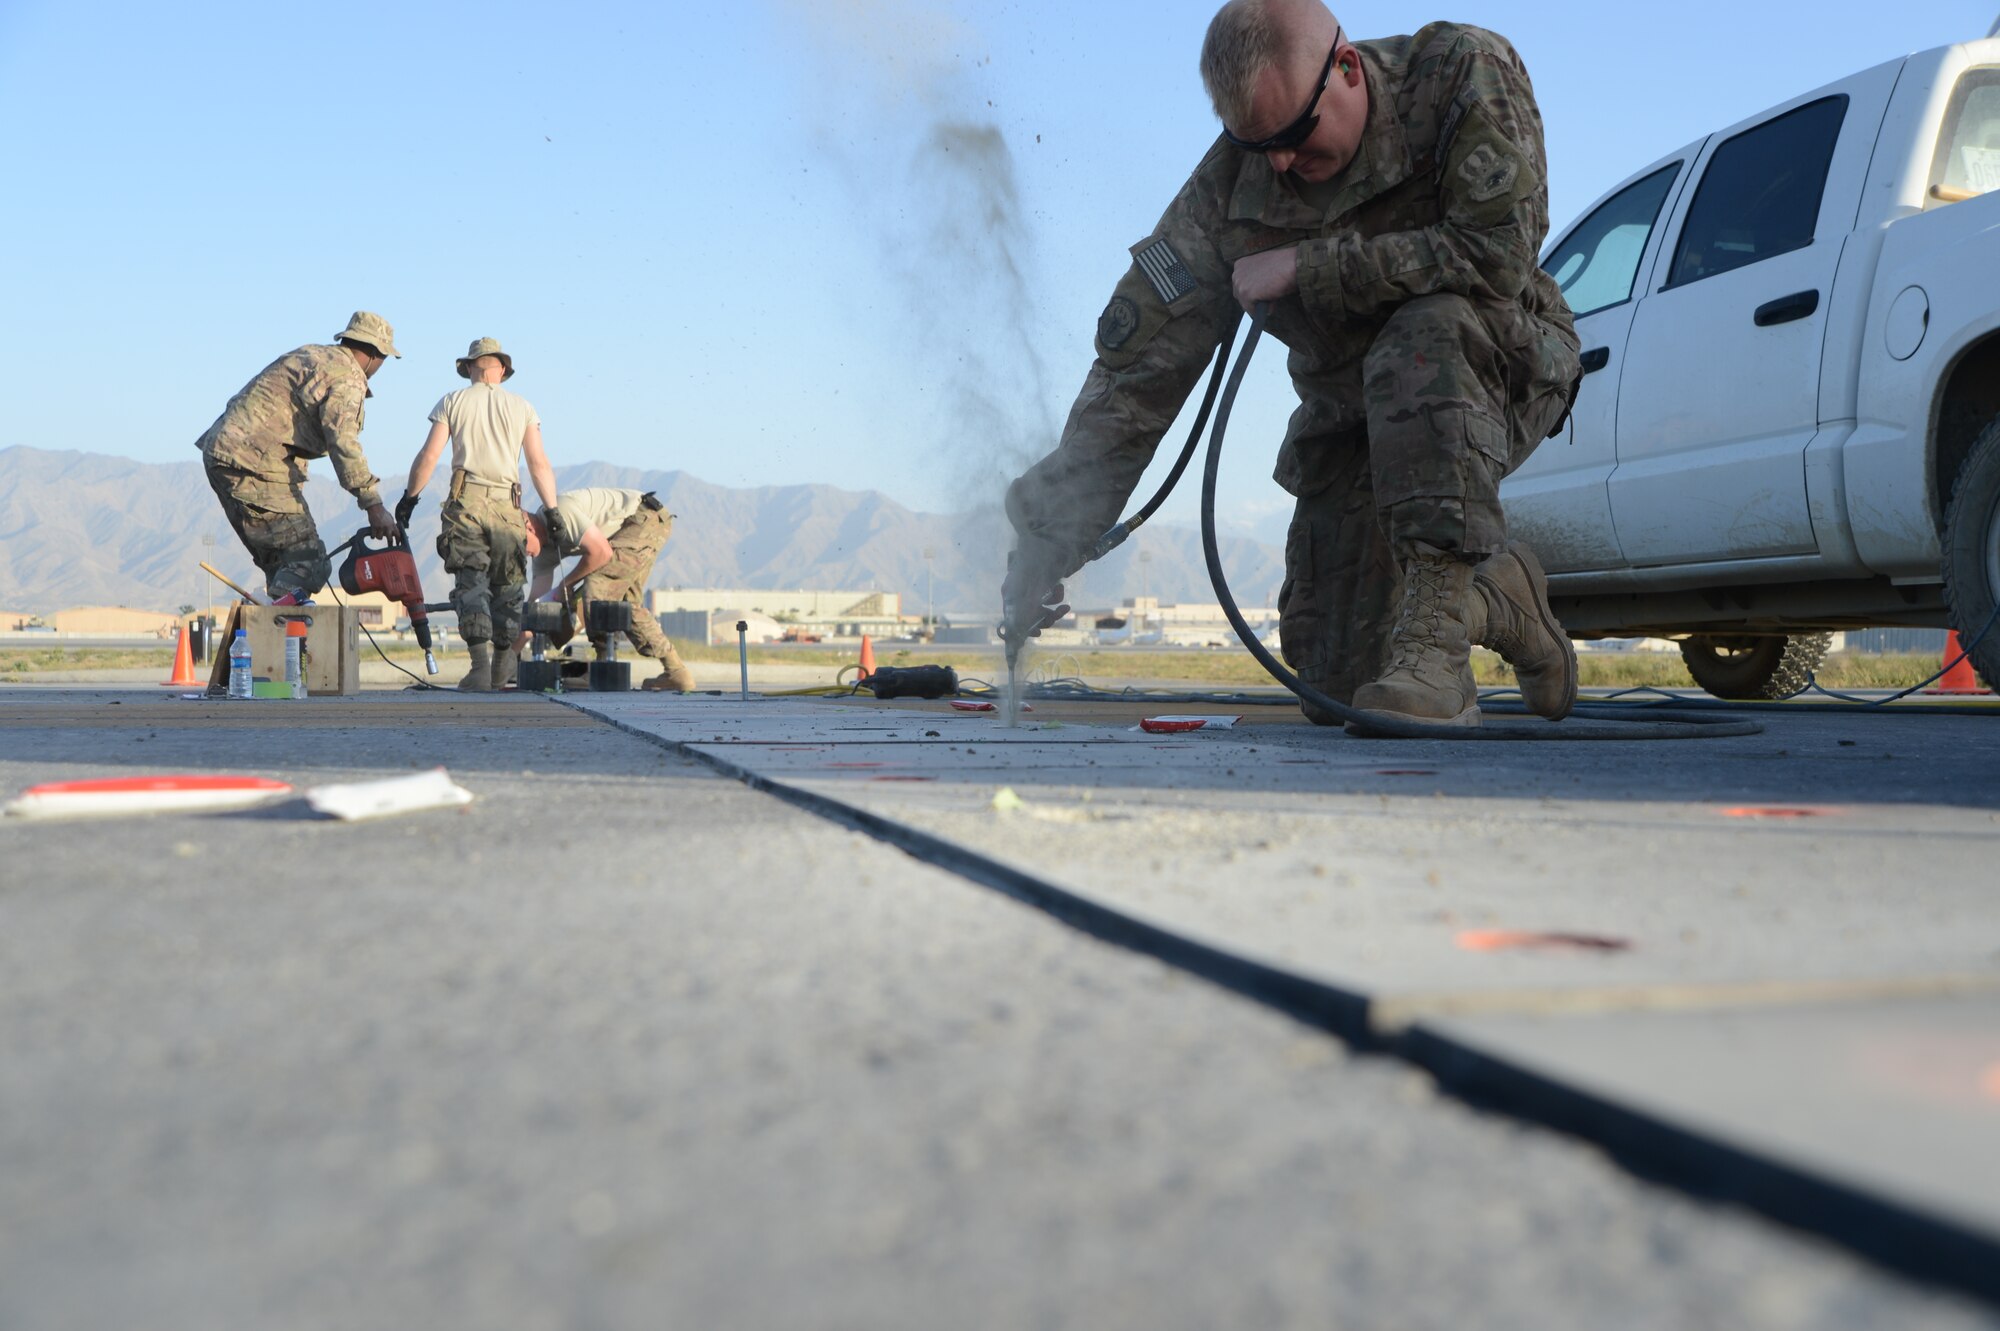 U.S. Air Force Tech. Sgt. C. J. White, a native of Houston, Texas and a heavy equipment operator assigned to the 455th Expeditionary Civil Engineer Squadron clears out dusts and rocks in a hole that will be used to install bolts in the ground to hold poly panels in place to secure aircraft arresting system cables at Bagram Airfield, Afghanistan June 8, 2014. Airmen replaced 502 bolts on the flight line. White is deployed from the 147th Reconnaissance Wing, Texas Air National Guard, Ellington Field Joint Reserve Base, Houston, Texas. (U.S. Air Force photo by Master Sgt. Cohen A. Young/Released)